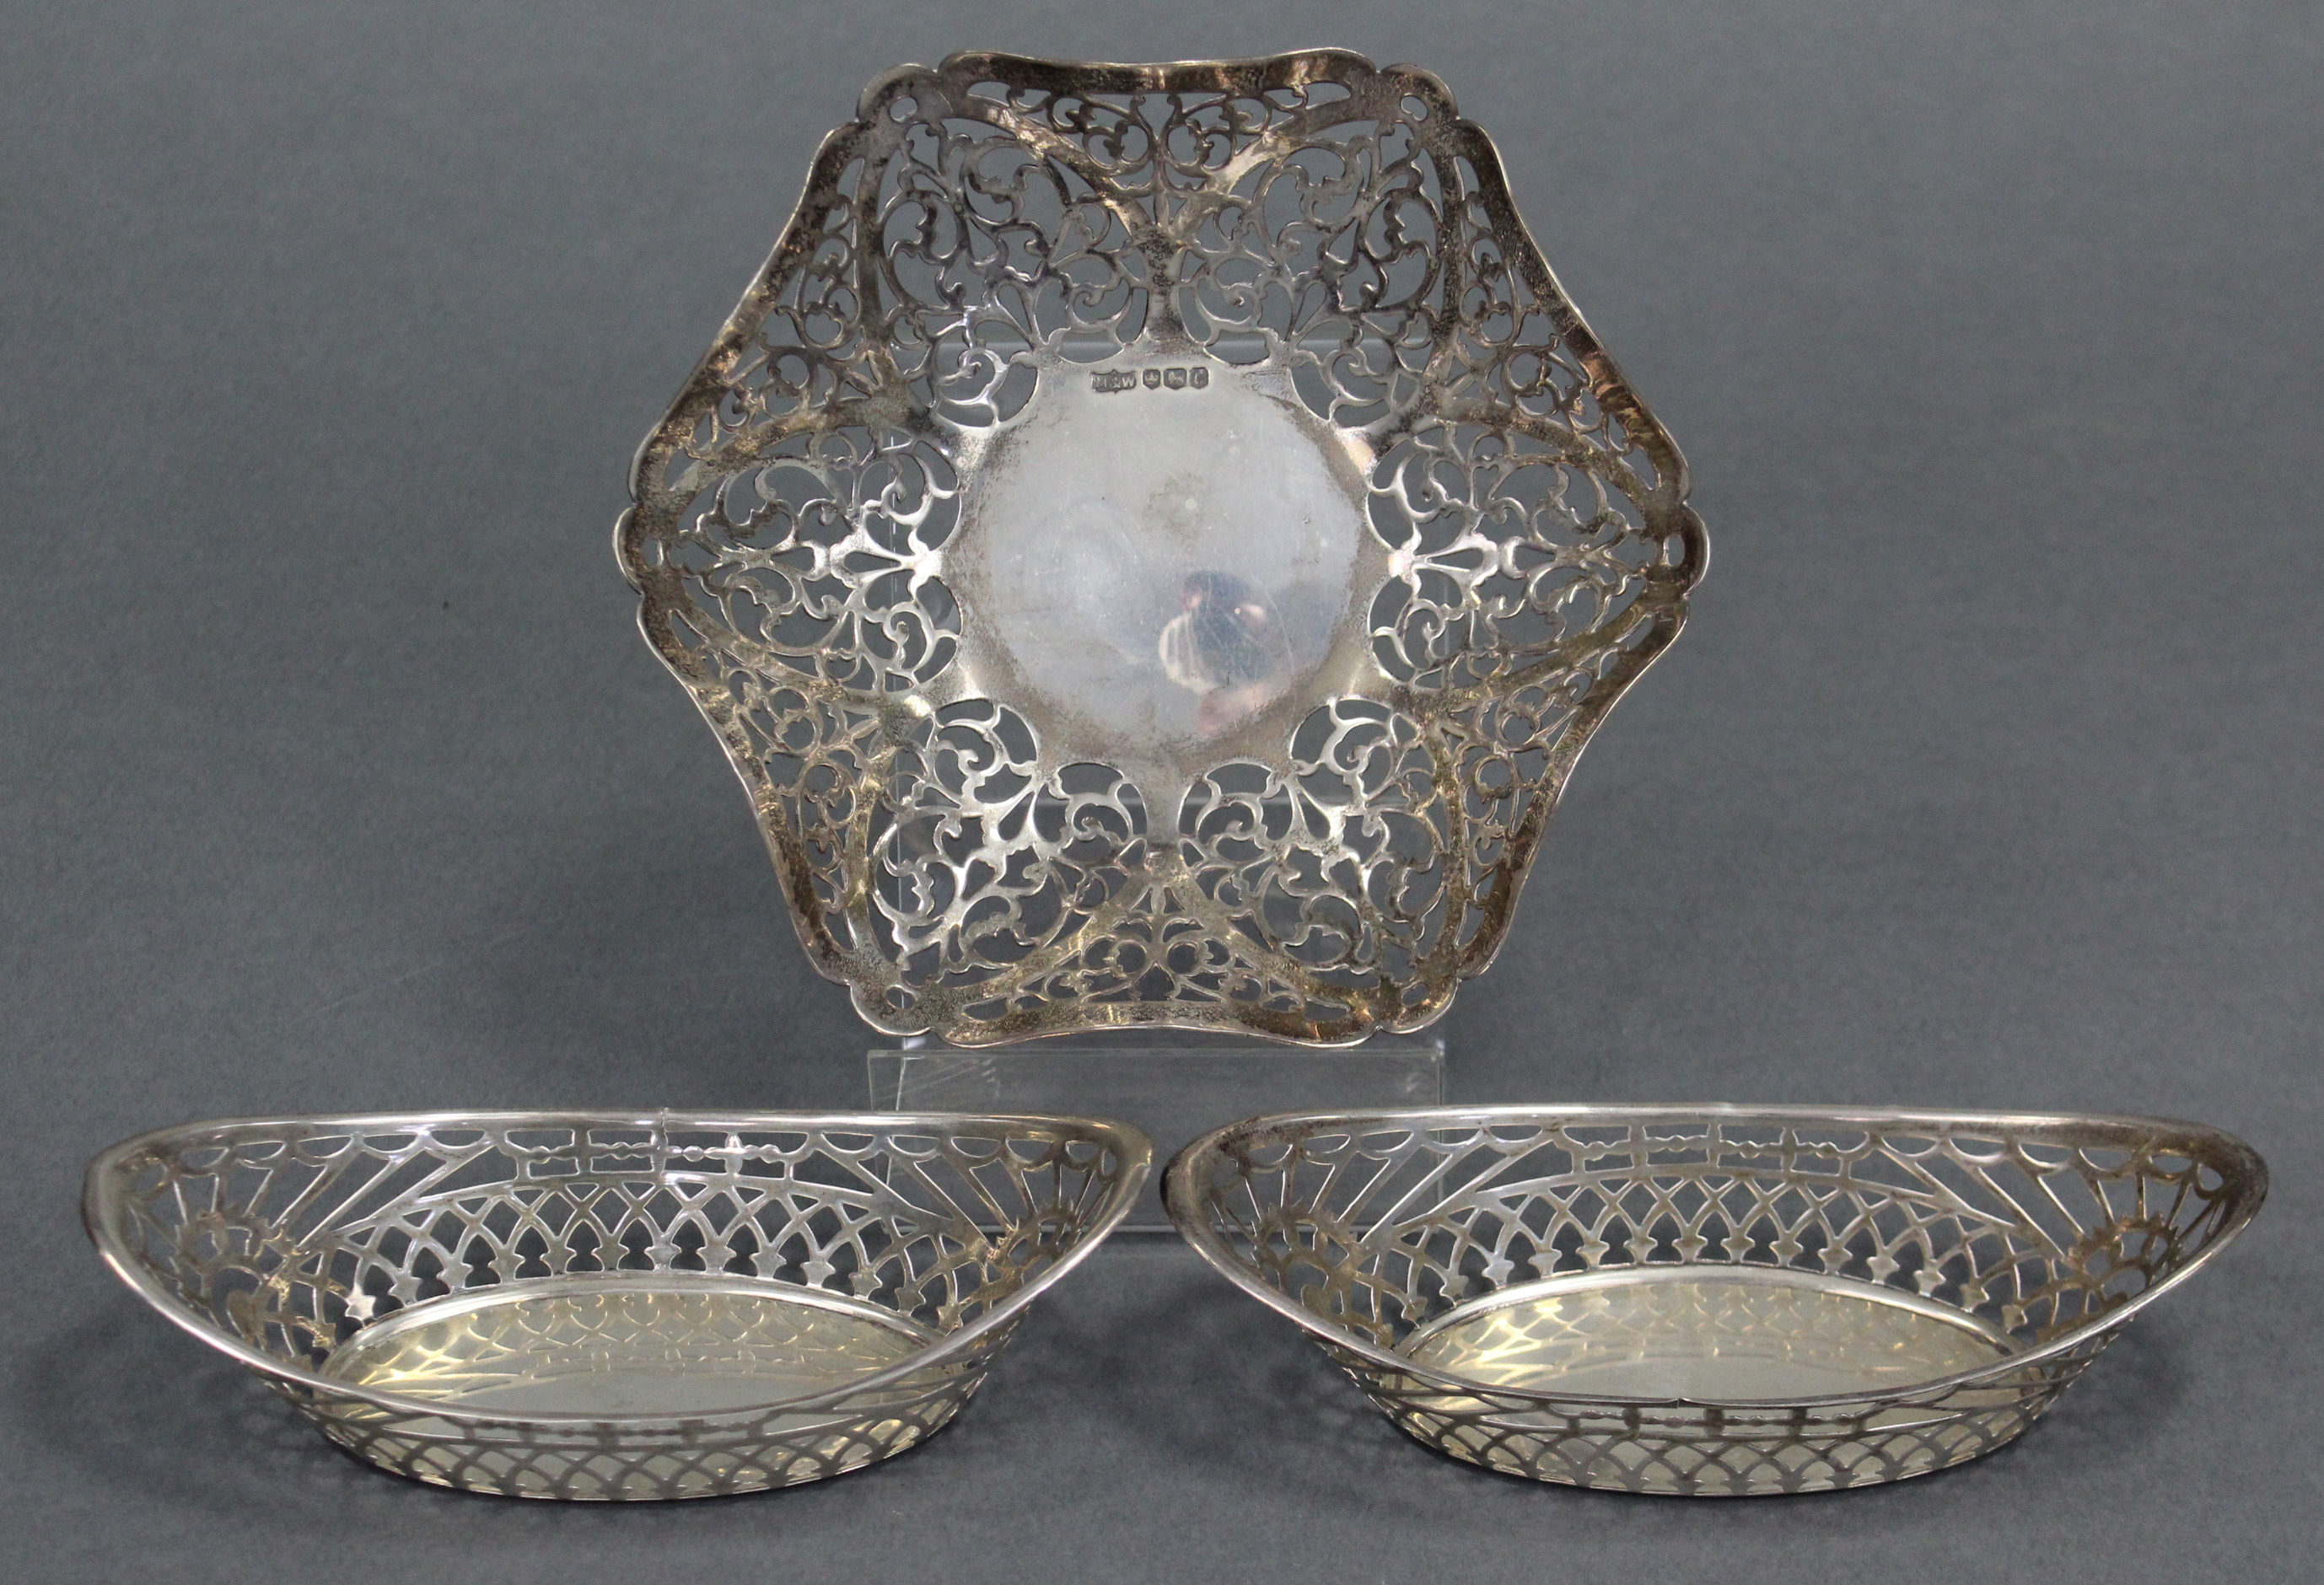 A pair of Edwardian silver oval sweetmeat dishes with pierced decoration, Birmingham 1908, by Levi &